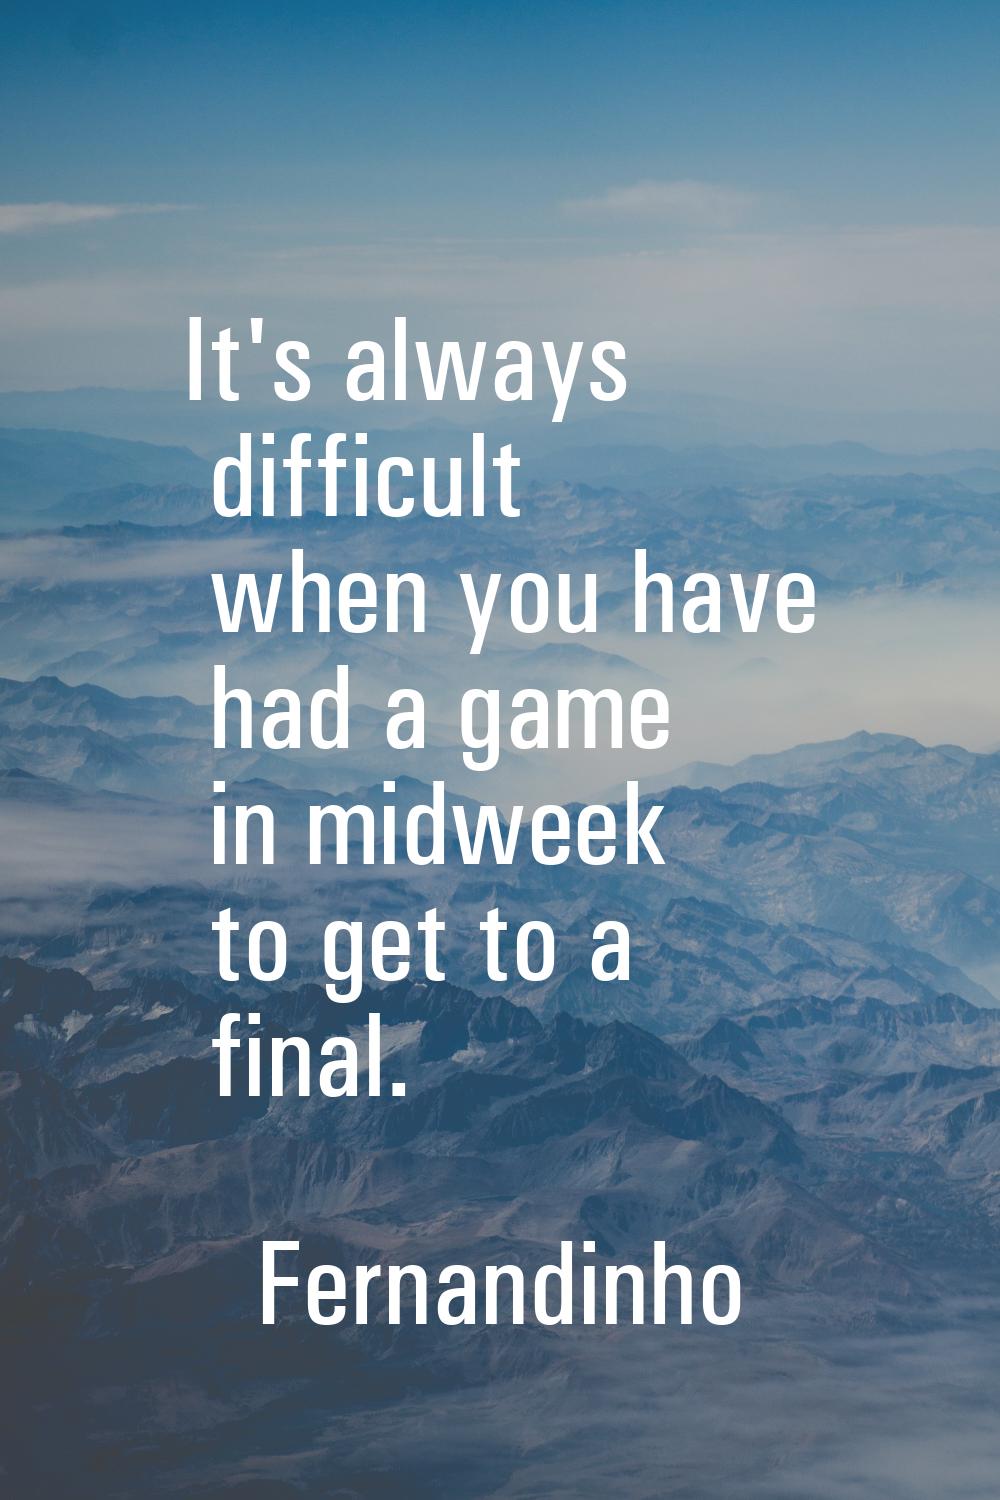 It's always difficult when you have had a game in midweek to get to a final.